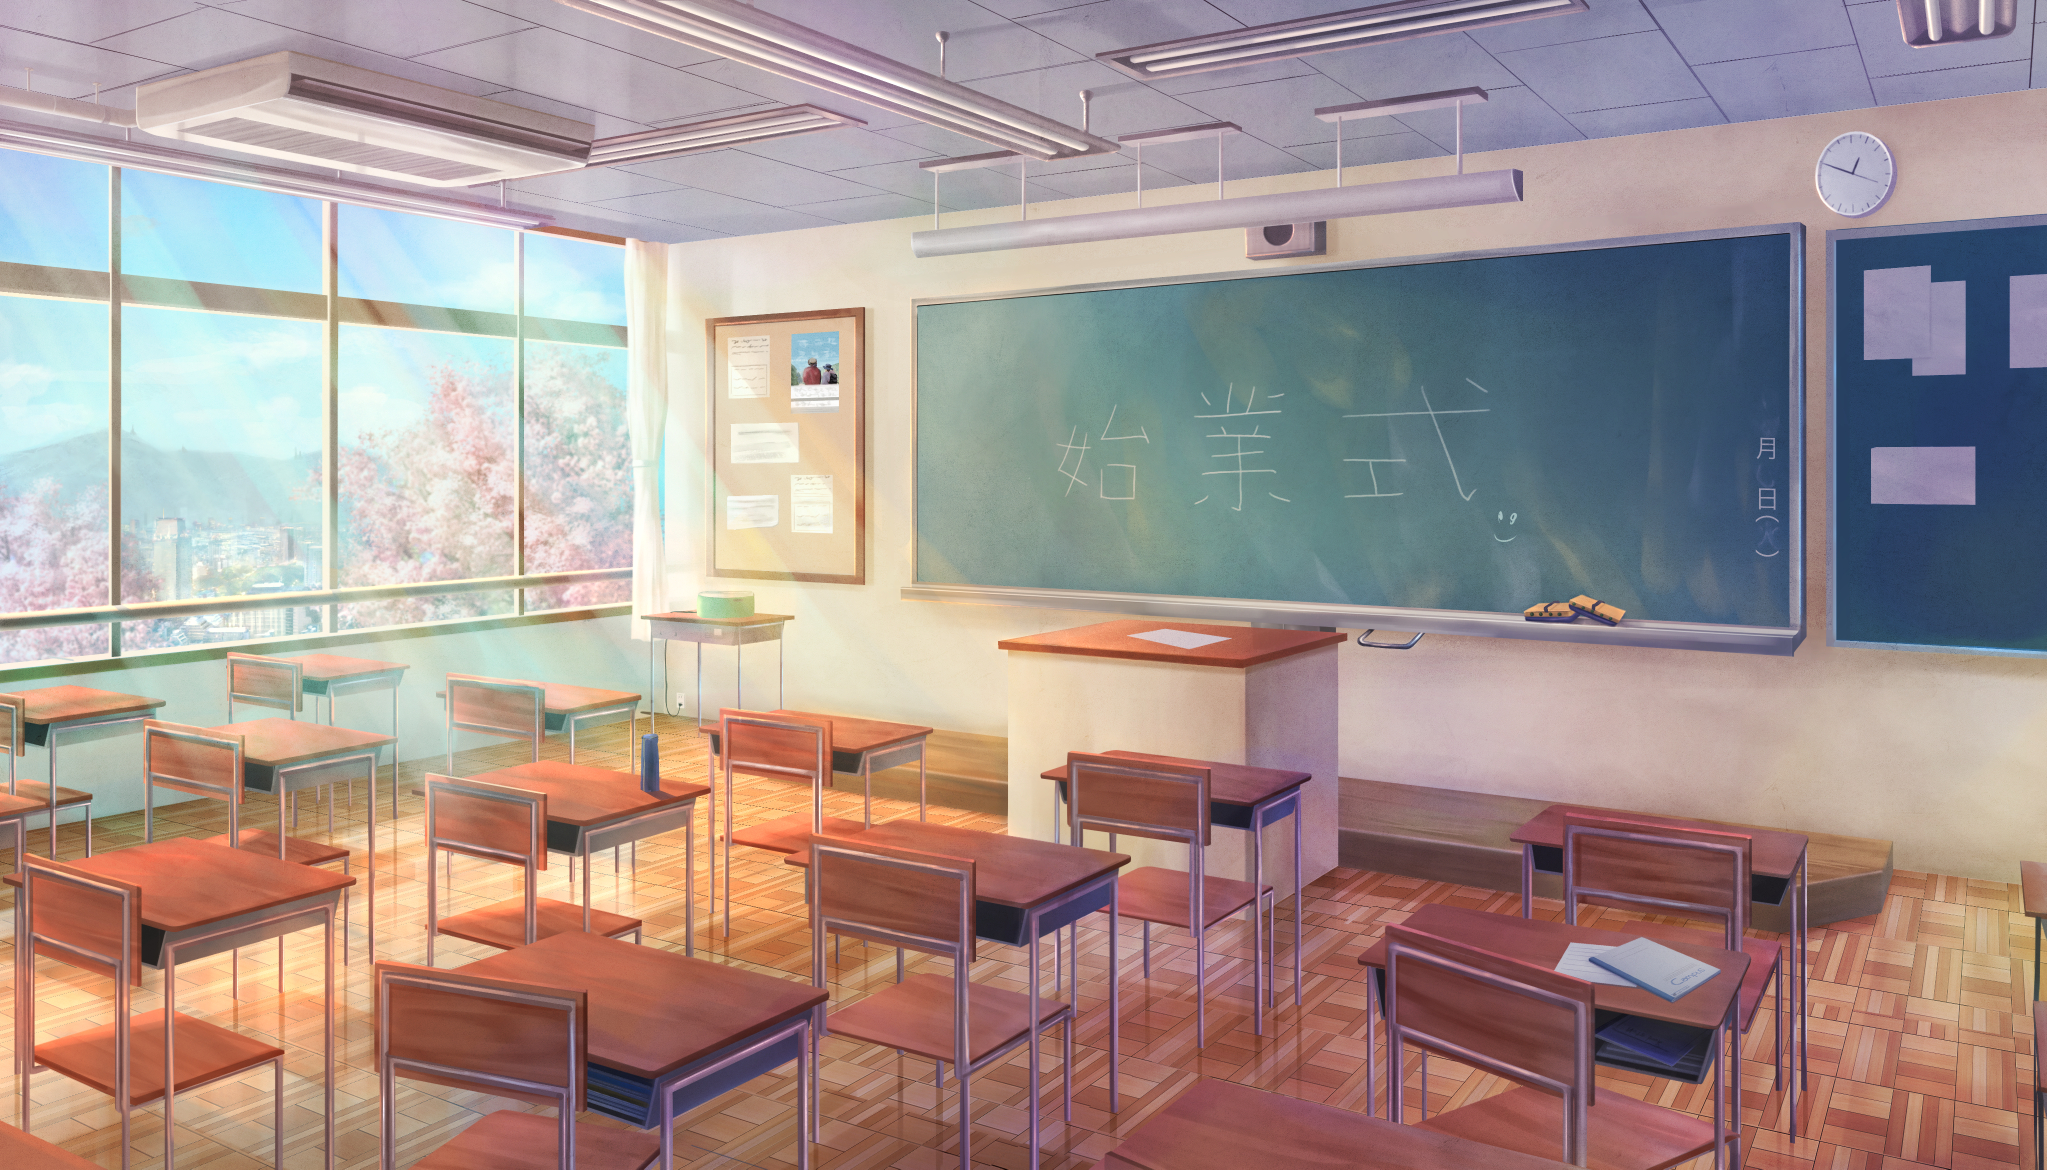 Anime Room HD Wallpaper | Background Image